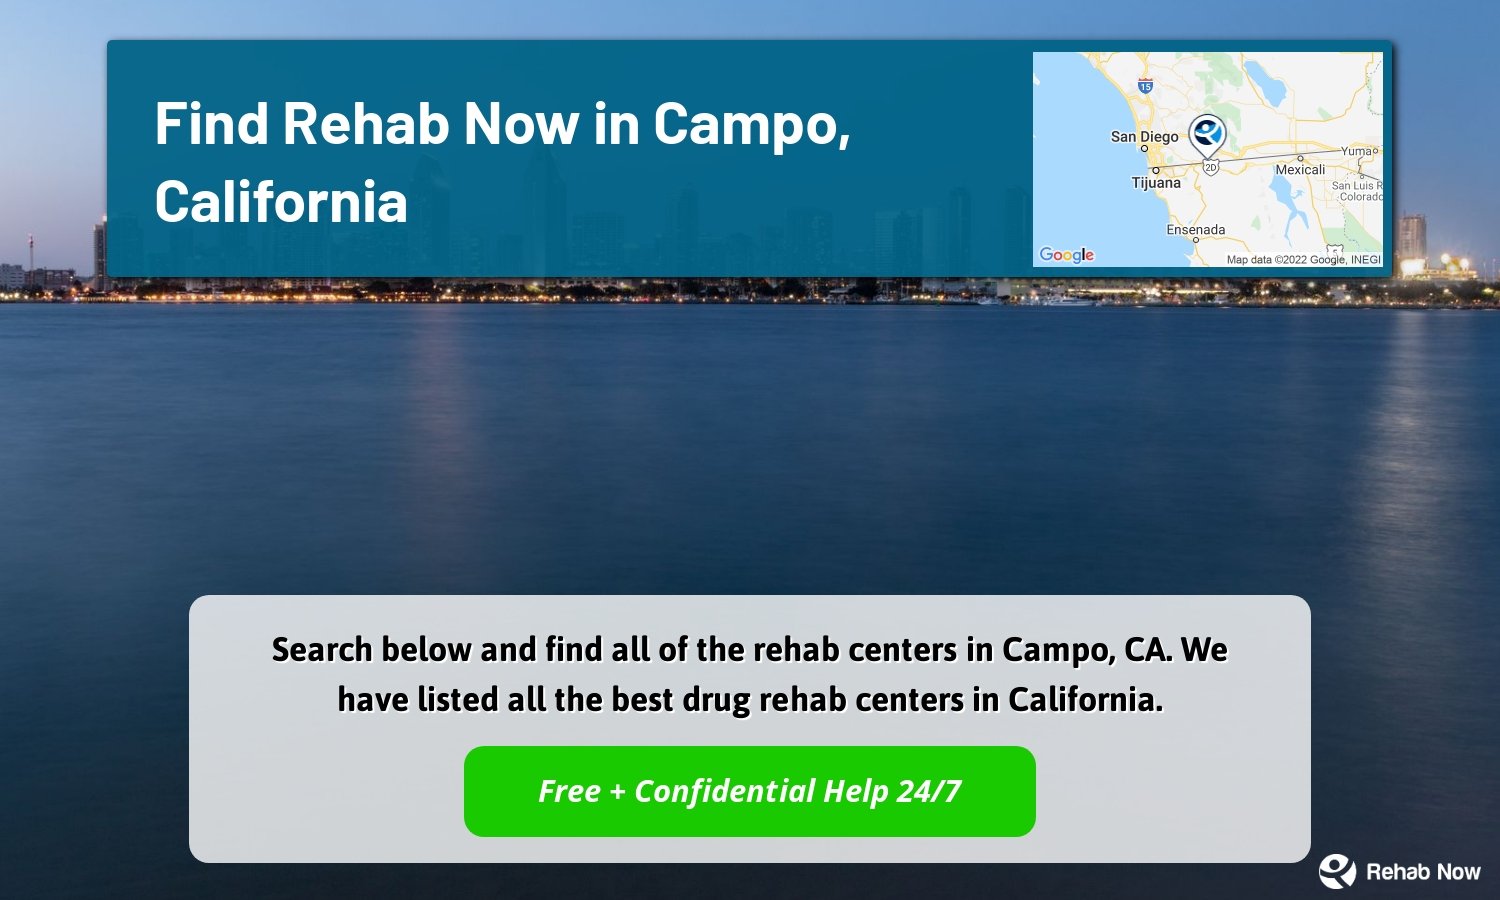 Search below and find all of the rehab centers in Campo, CA. We have listed all the best drug rehab centers in California.